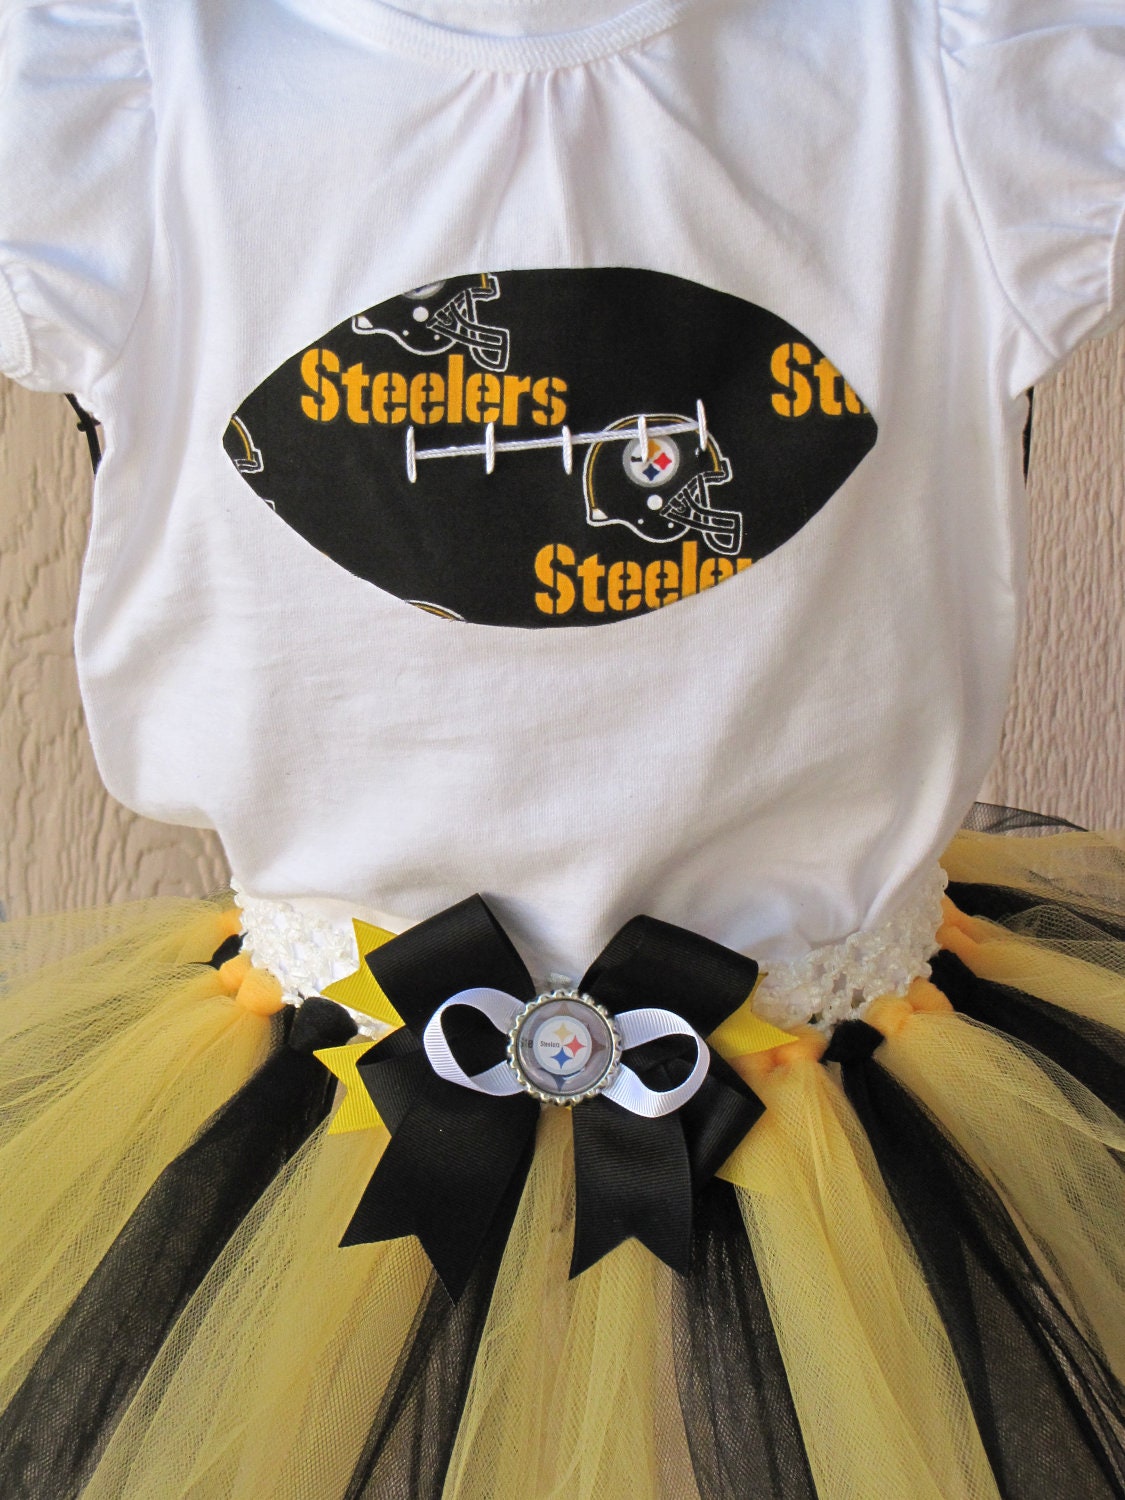 NFL Steelers Black and Yellow Tutu & Shirt Set with Detachable Hair Bow  24M